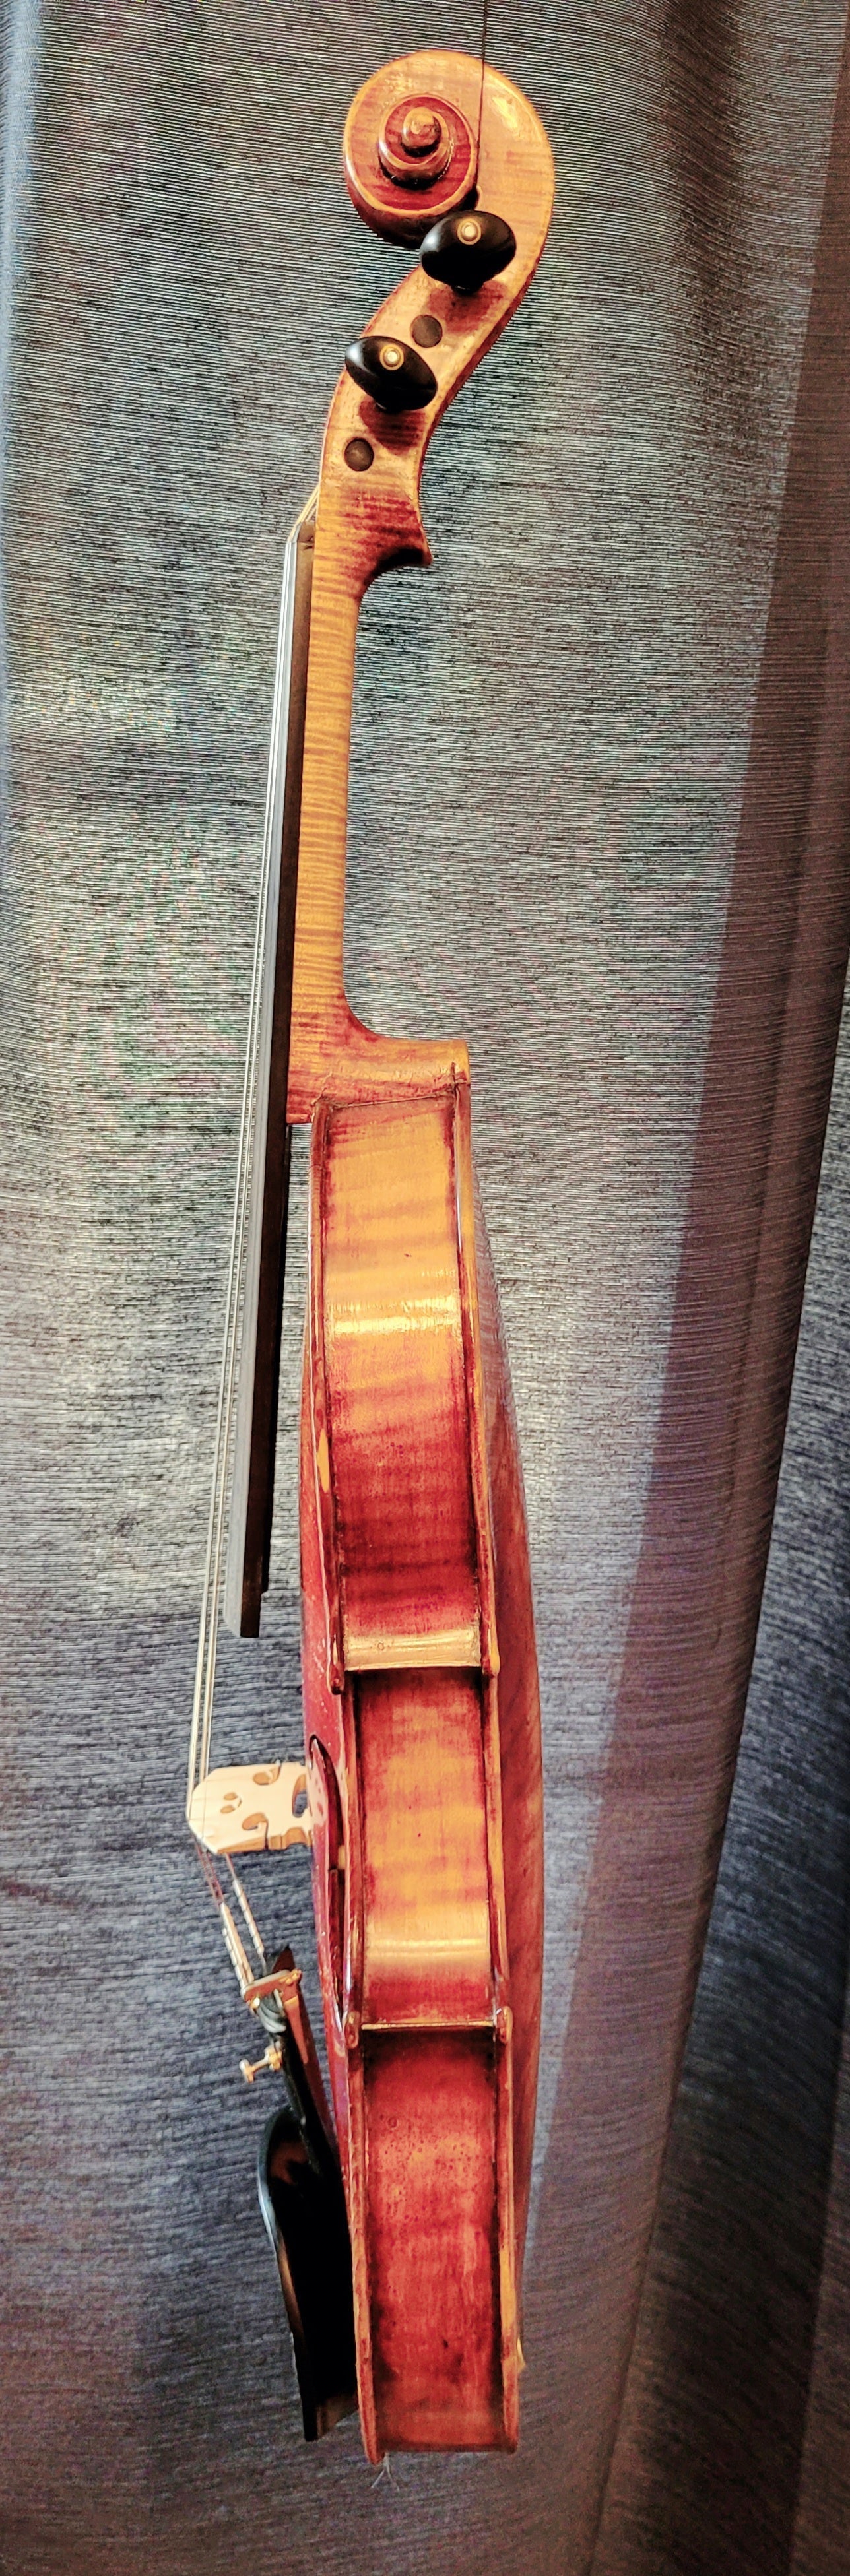 Josef Theodor Wunderlich Violin Outfit - 4/4 Strings, Bows & More